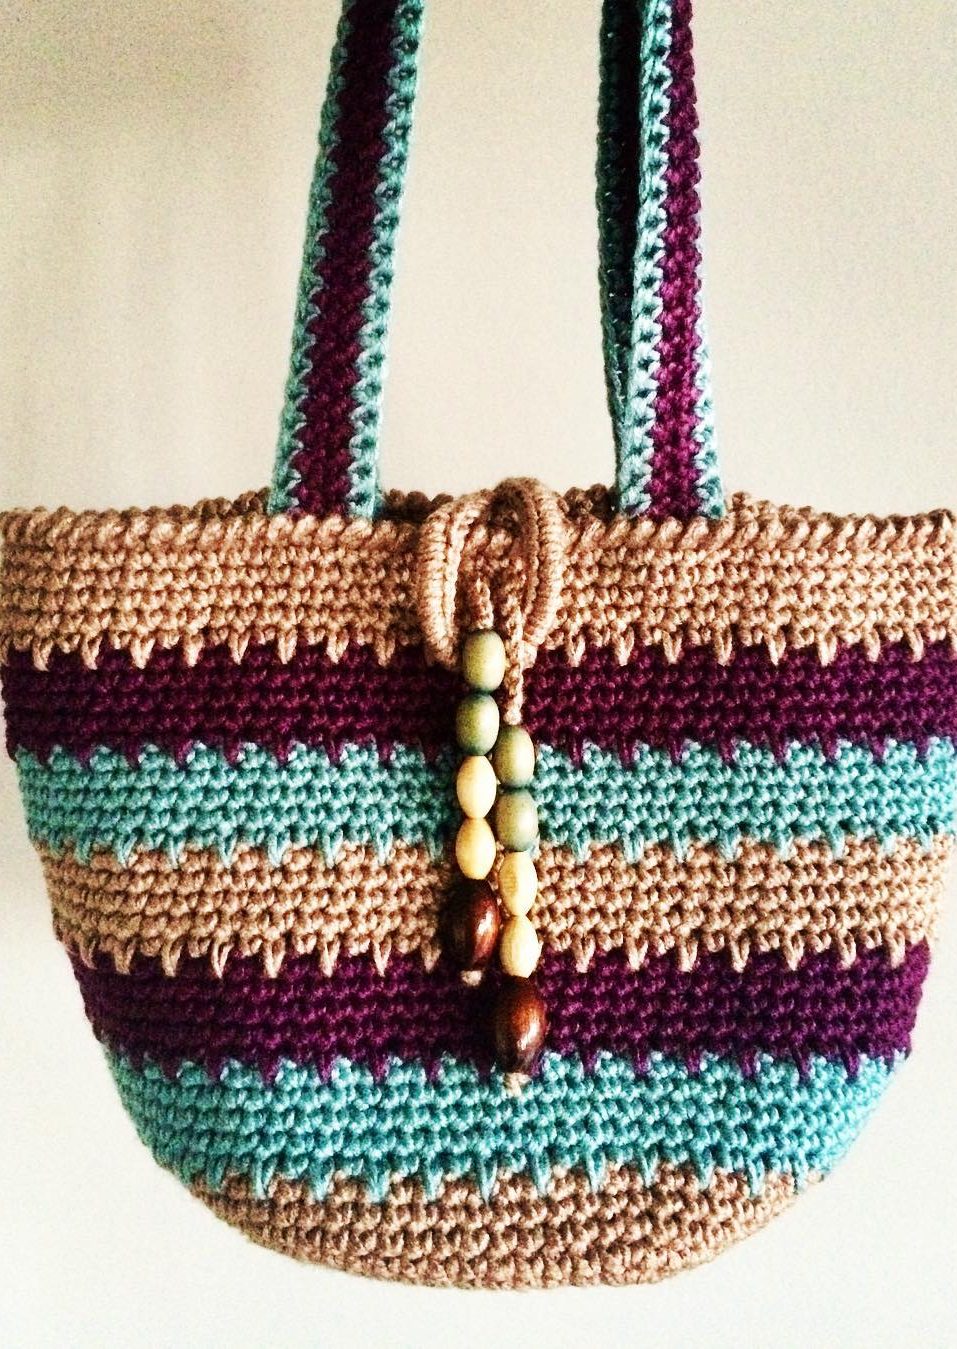 20+ THE MOST WONDERFUL FREE CROCHET BAG MODELS 2019 - Page 13 of 28 ...